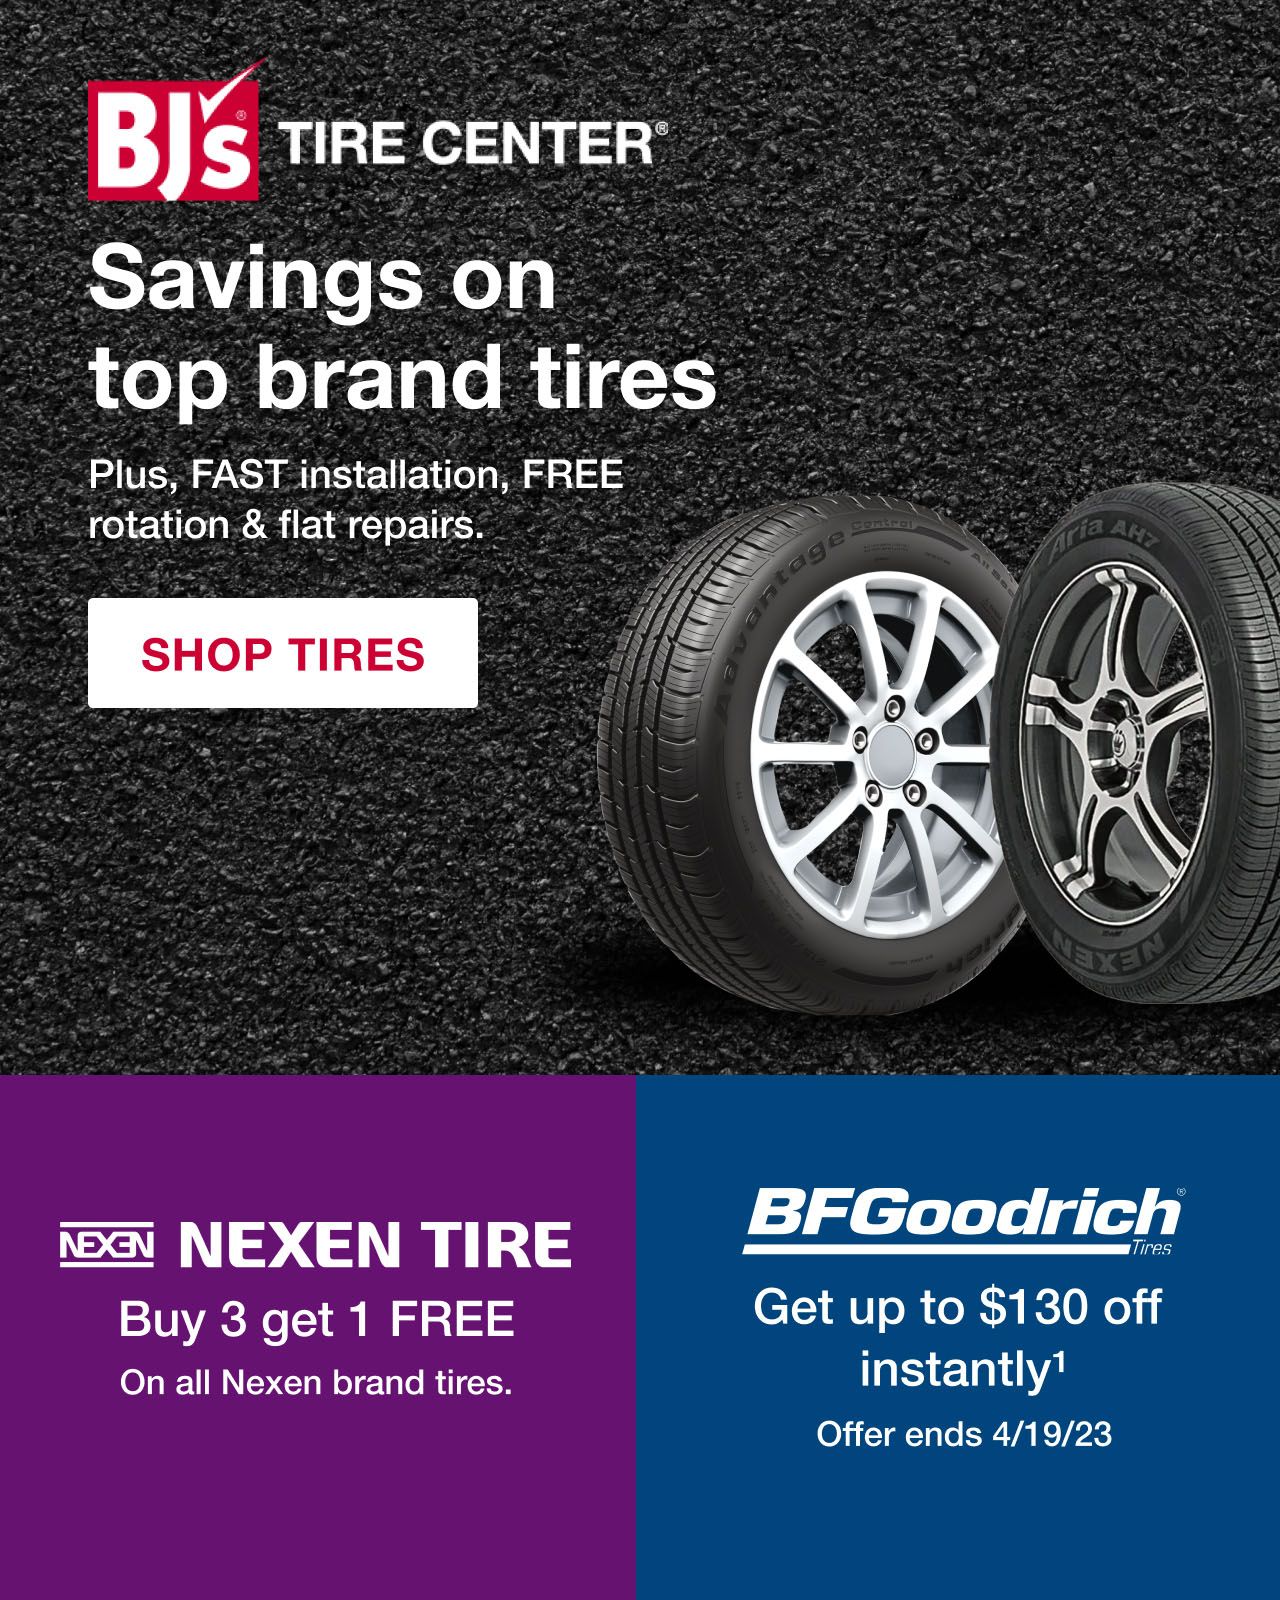 BJ's Tire Center. Savings on top brand tires. Plus, FAST installation, FREE rotation and flat repairs. Click to shop tires.